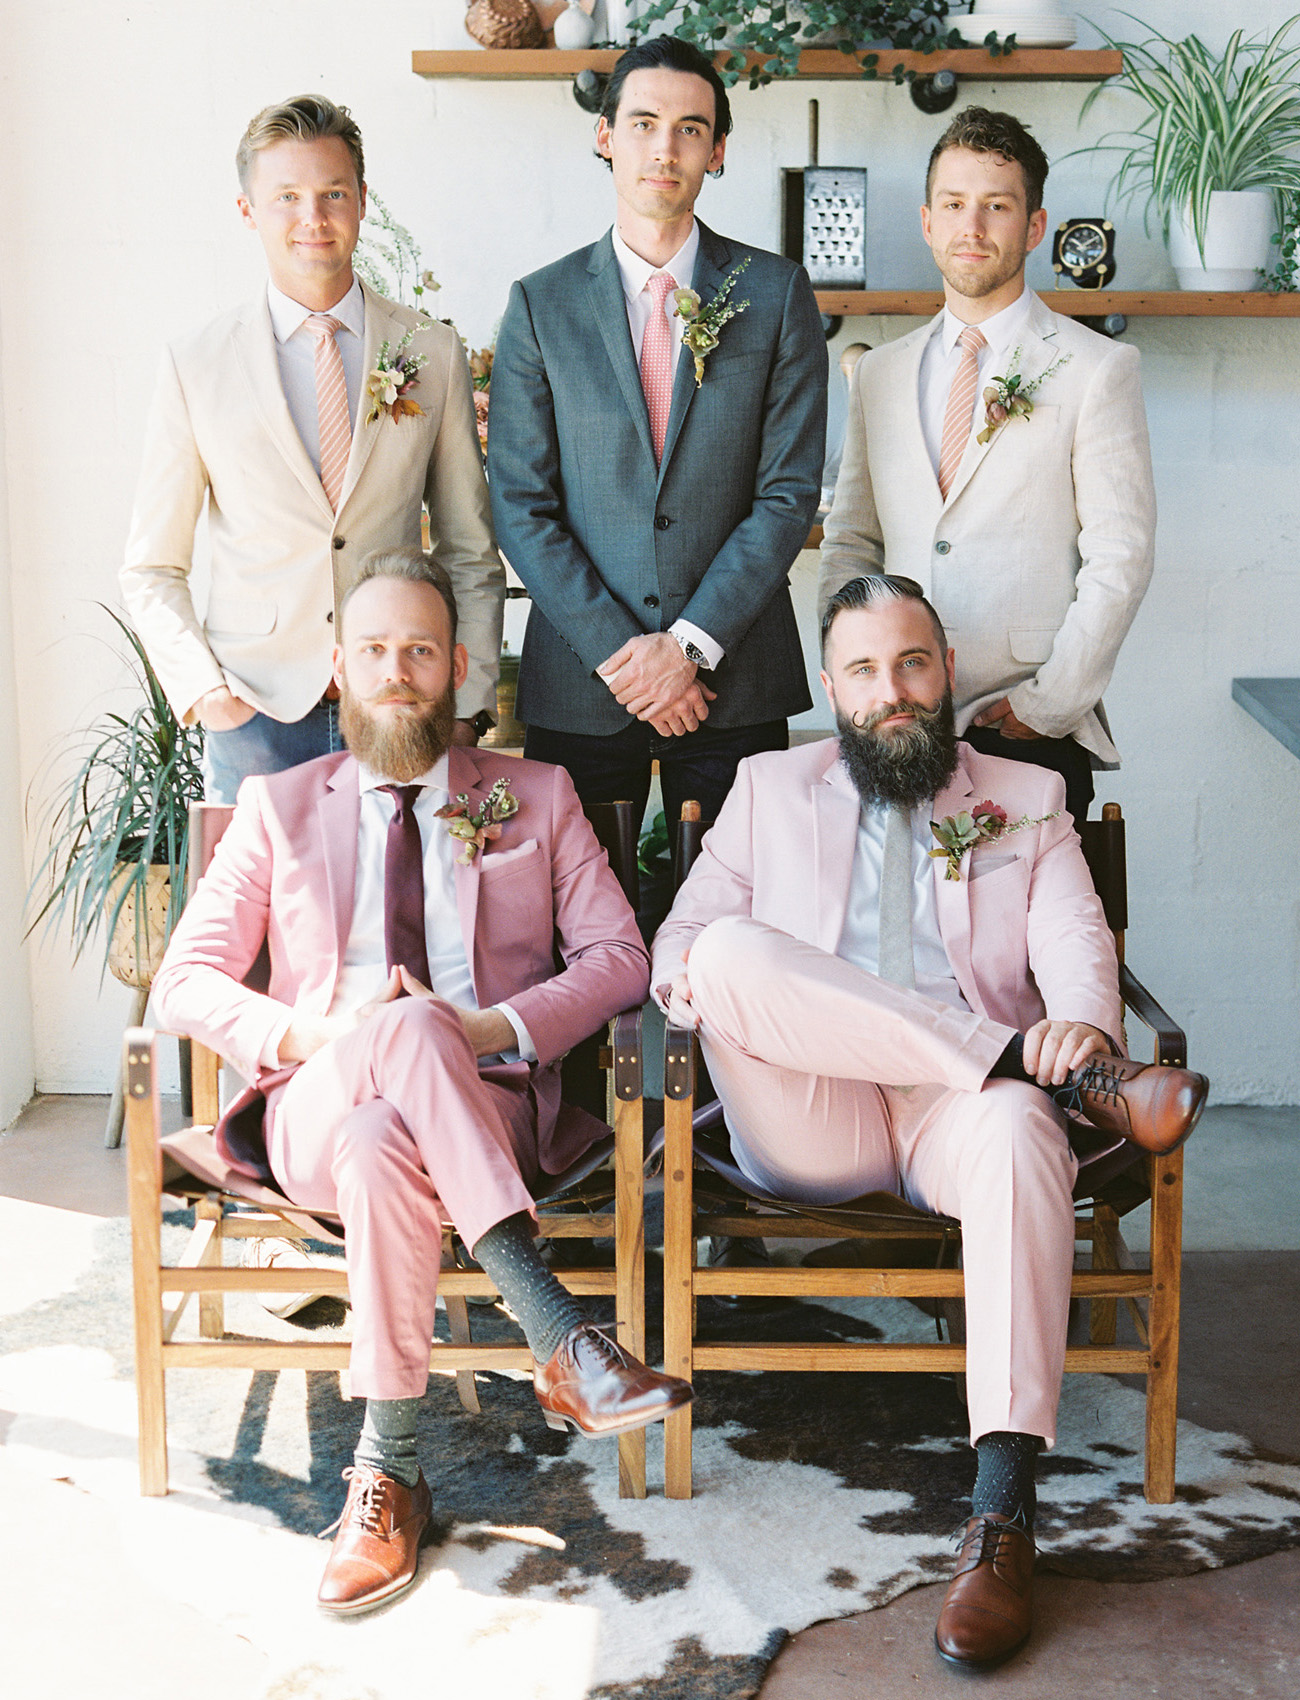 This wedding shoot was beautifully and elegantly masculine, with a unique color palette and cool styling